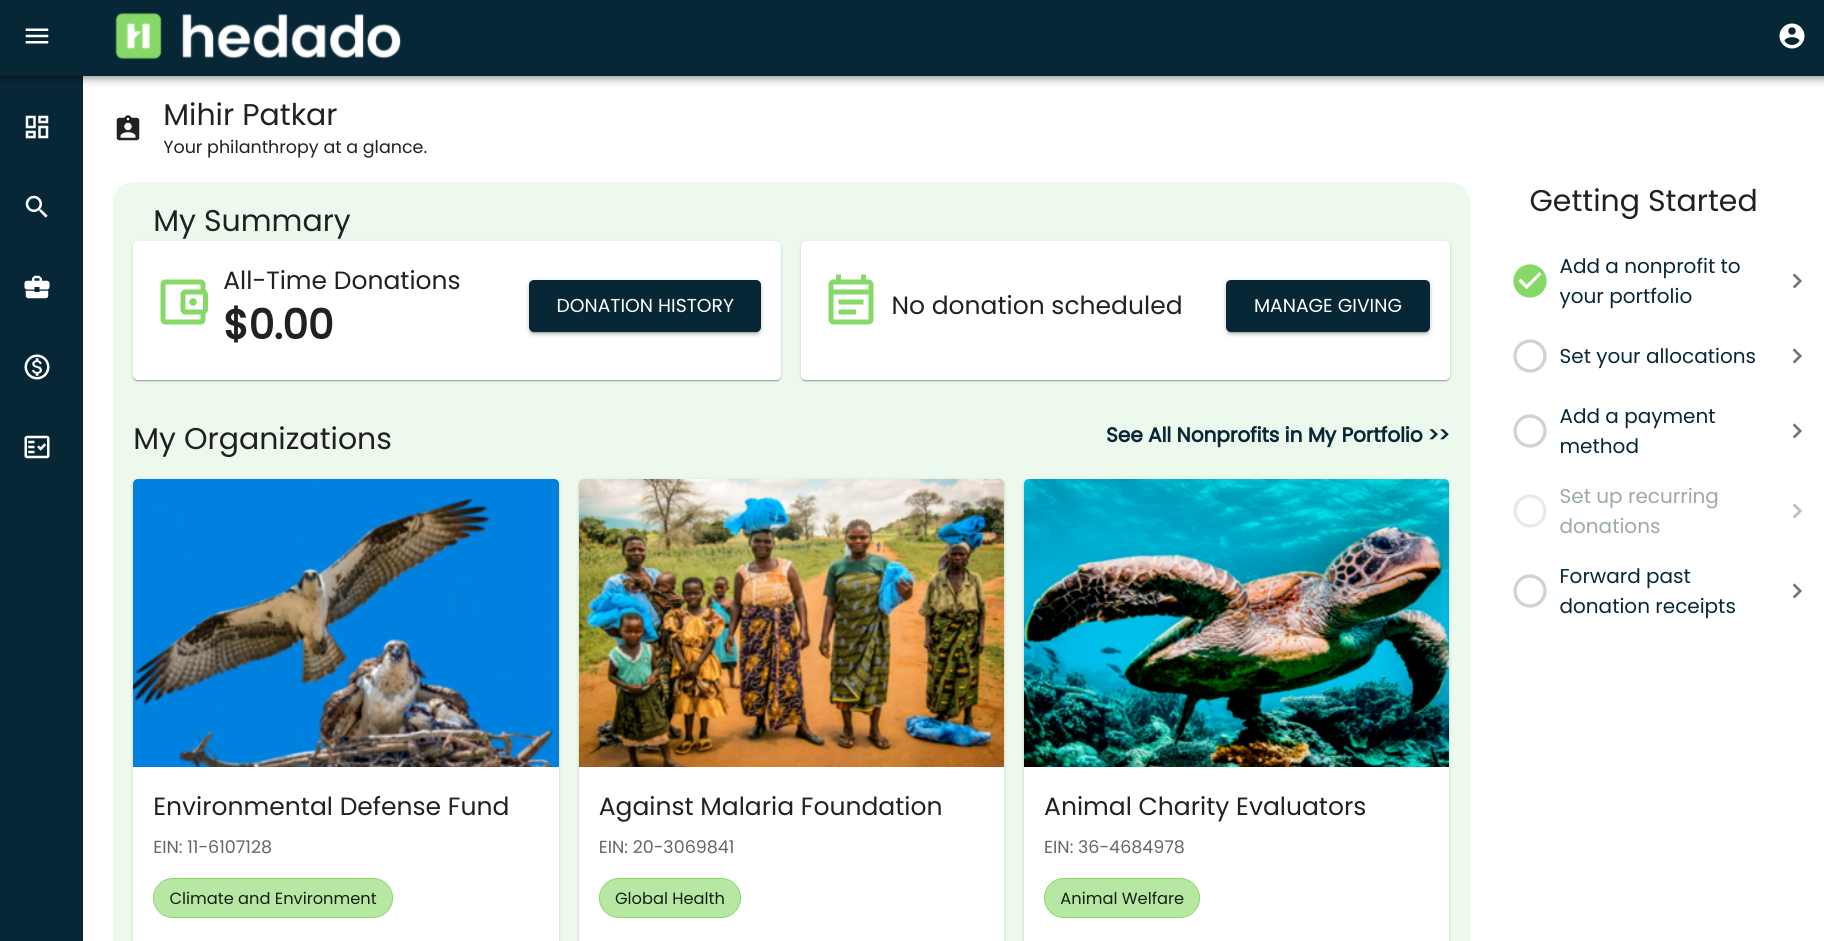 Hedado is one dashboard to manage all your charitable gifts in one place, and track donation receipts